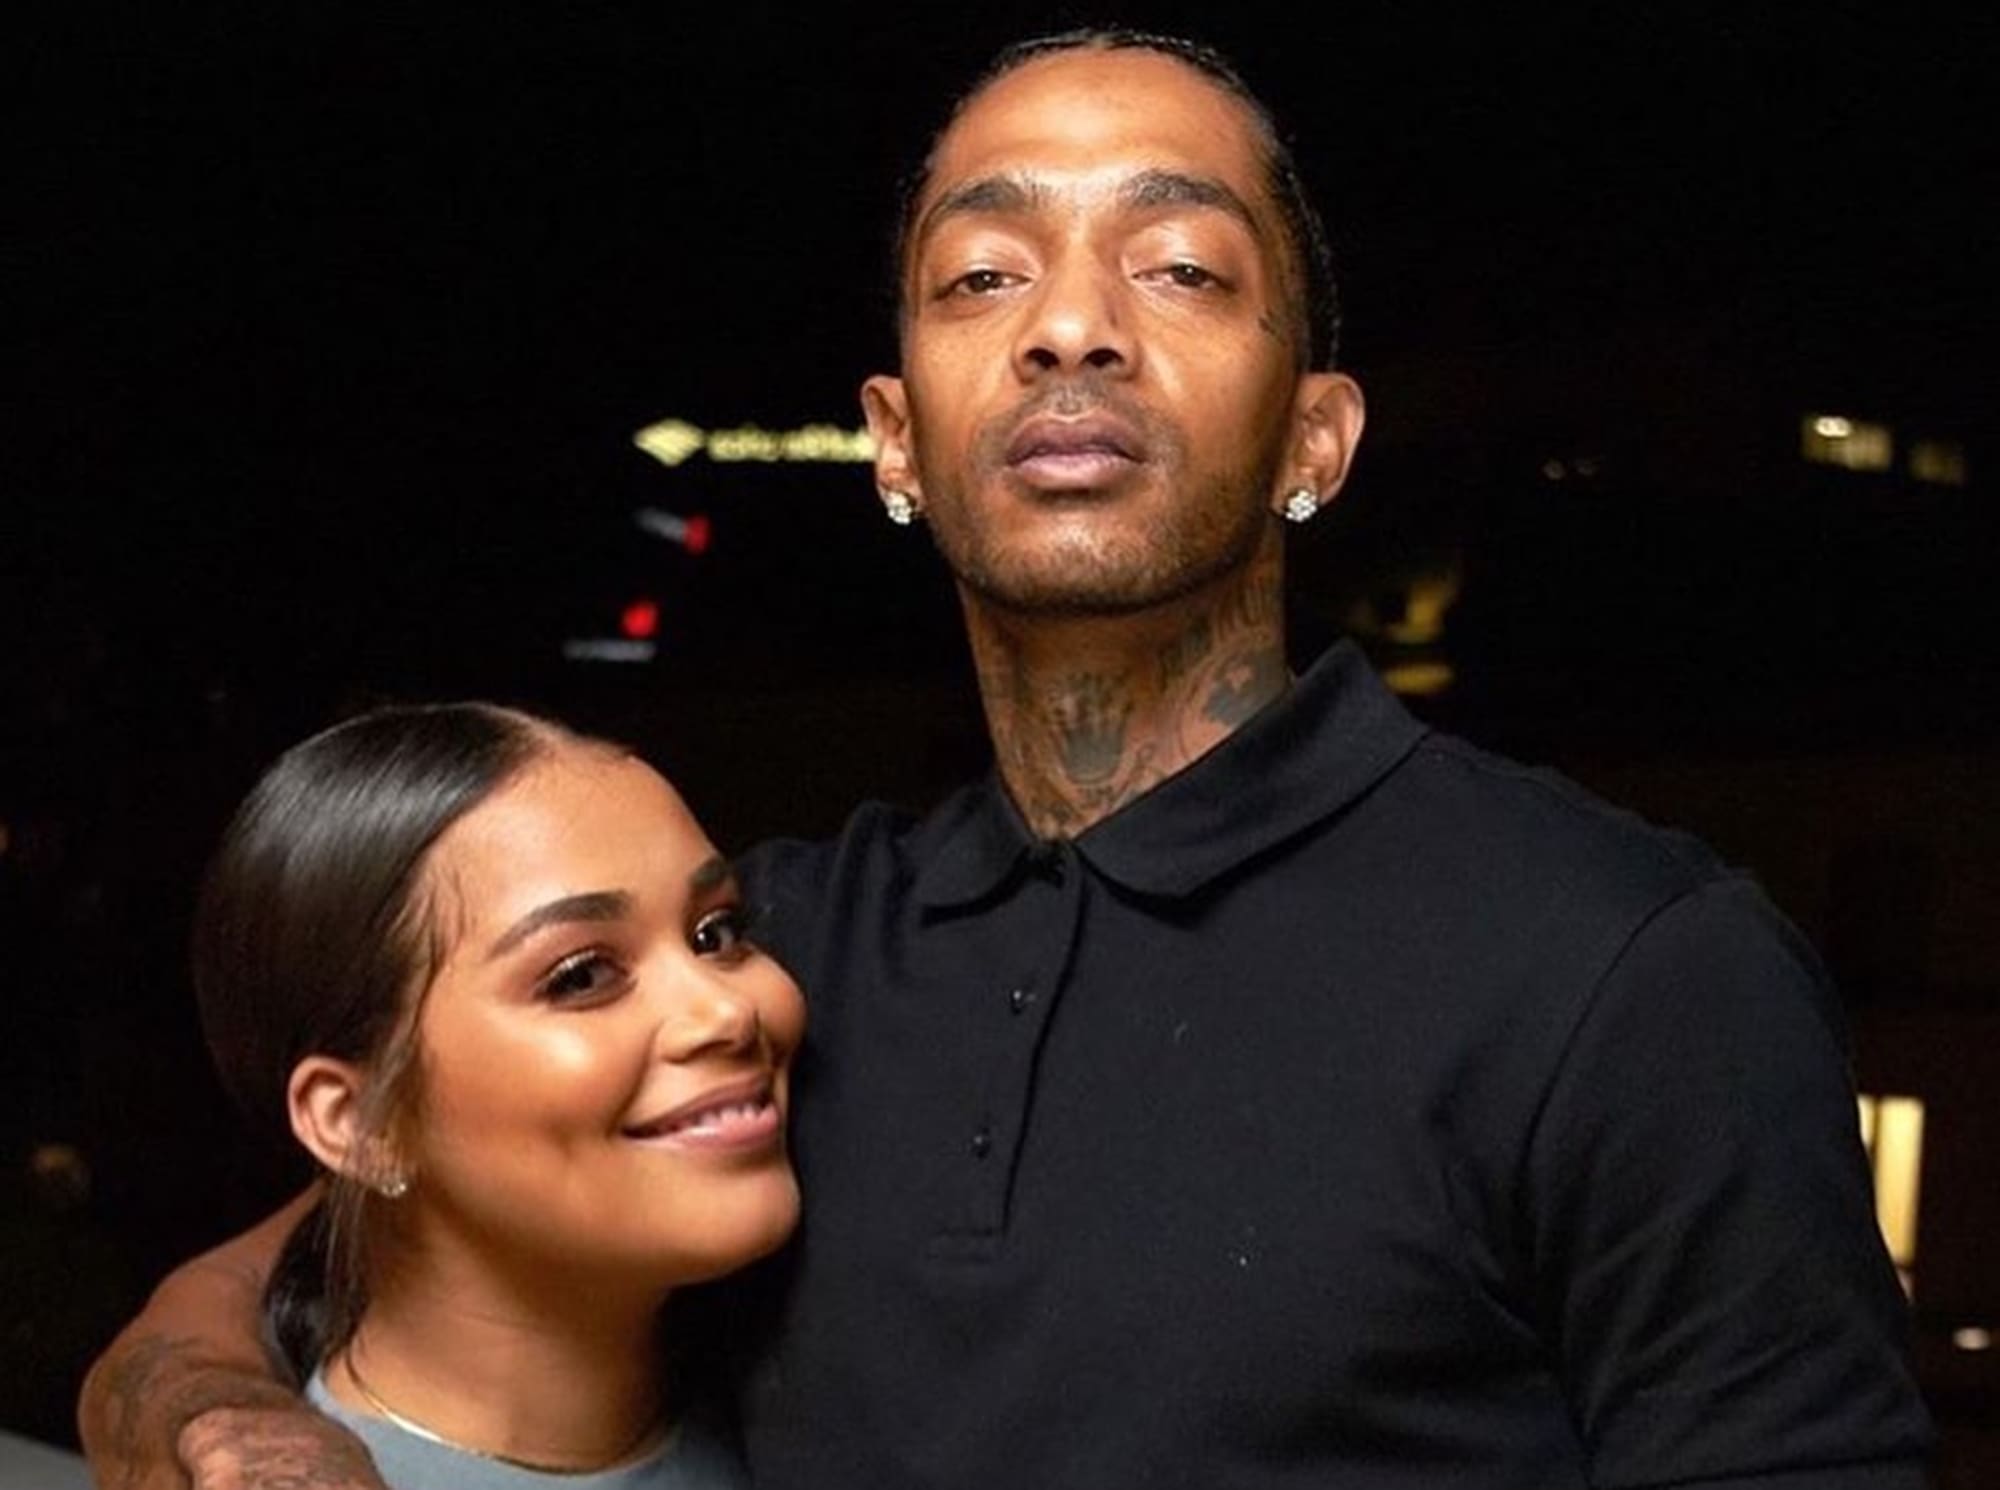 Lauren London's Photo Of The Love Of Her Life Has Fans Praising Nipsey Hussle's Manners